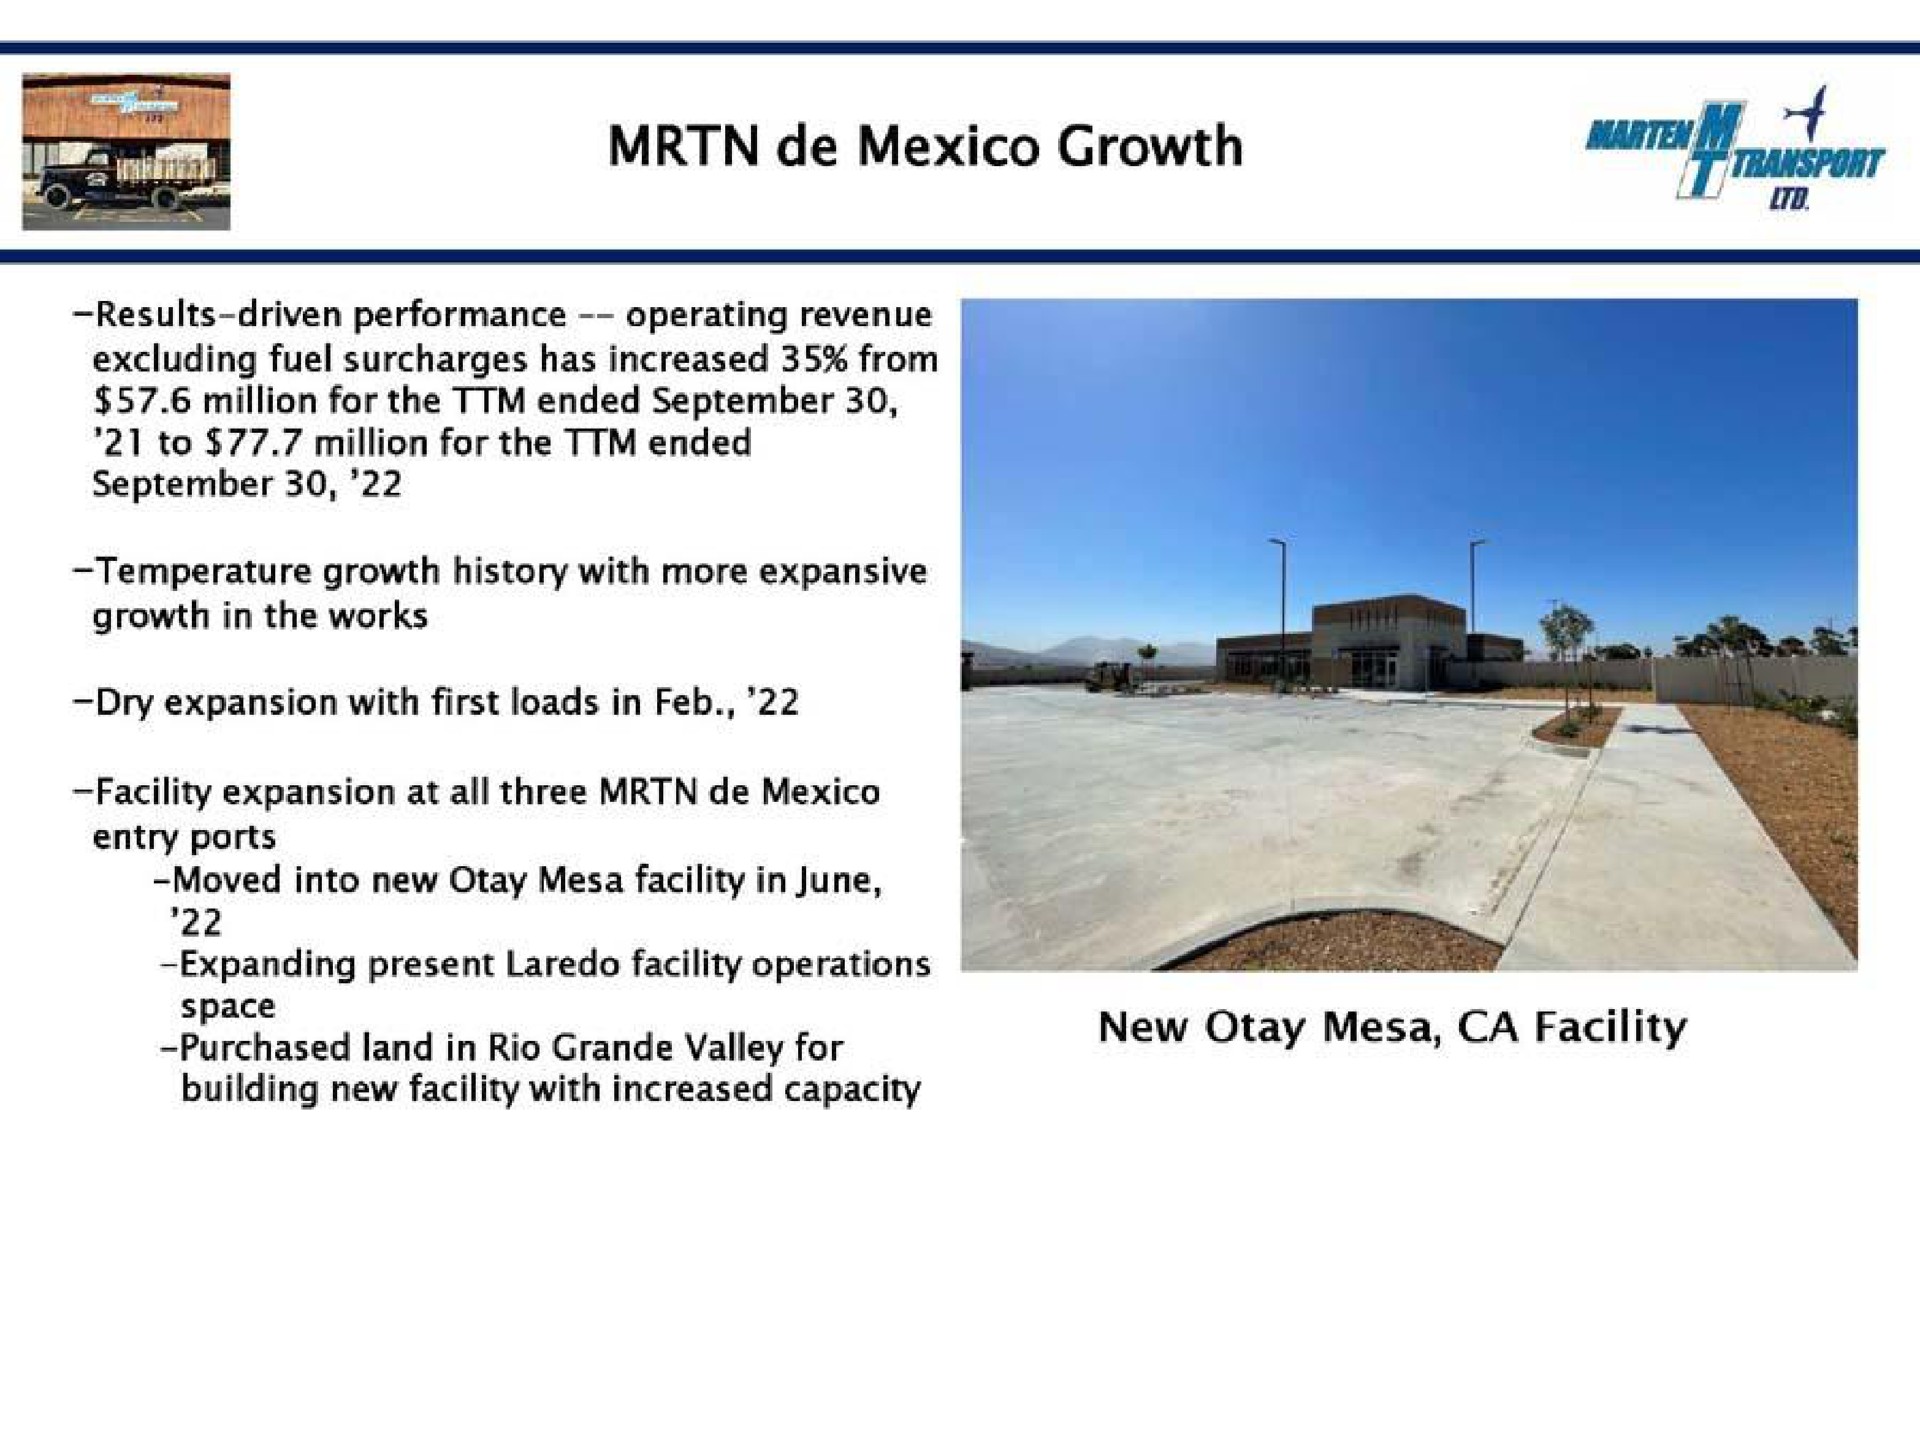 growth new mesa facility space | Marten Transport